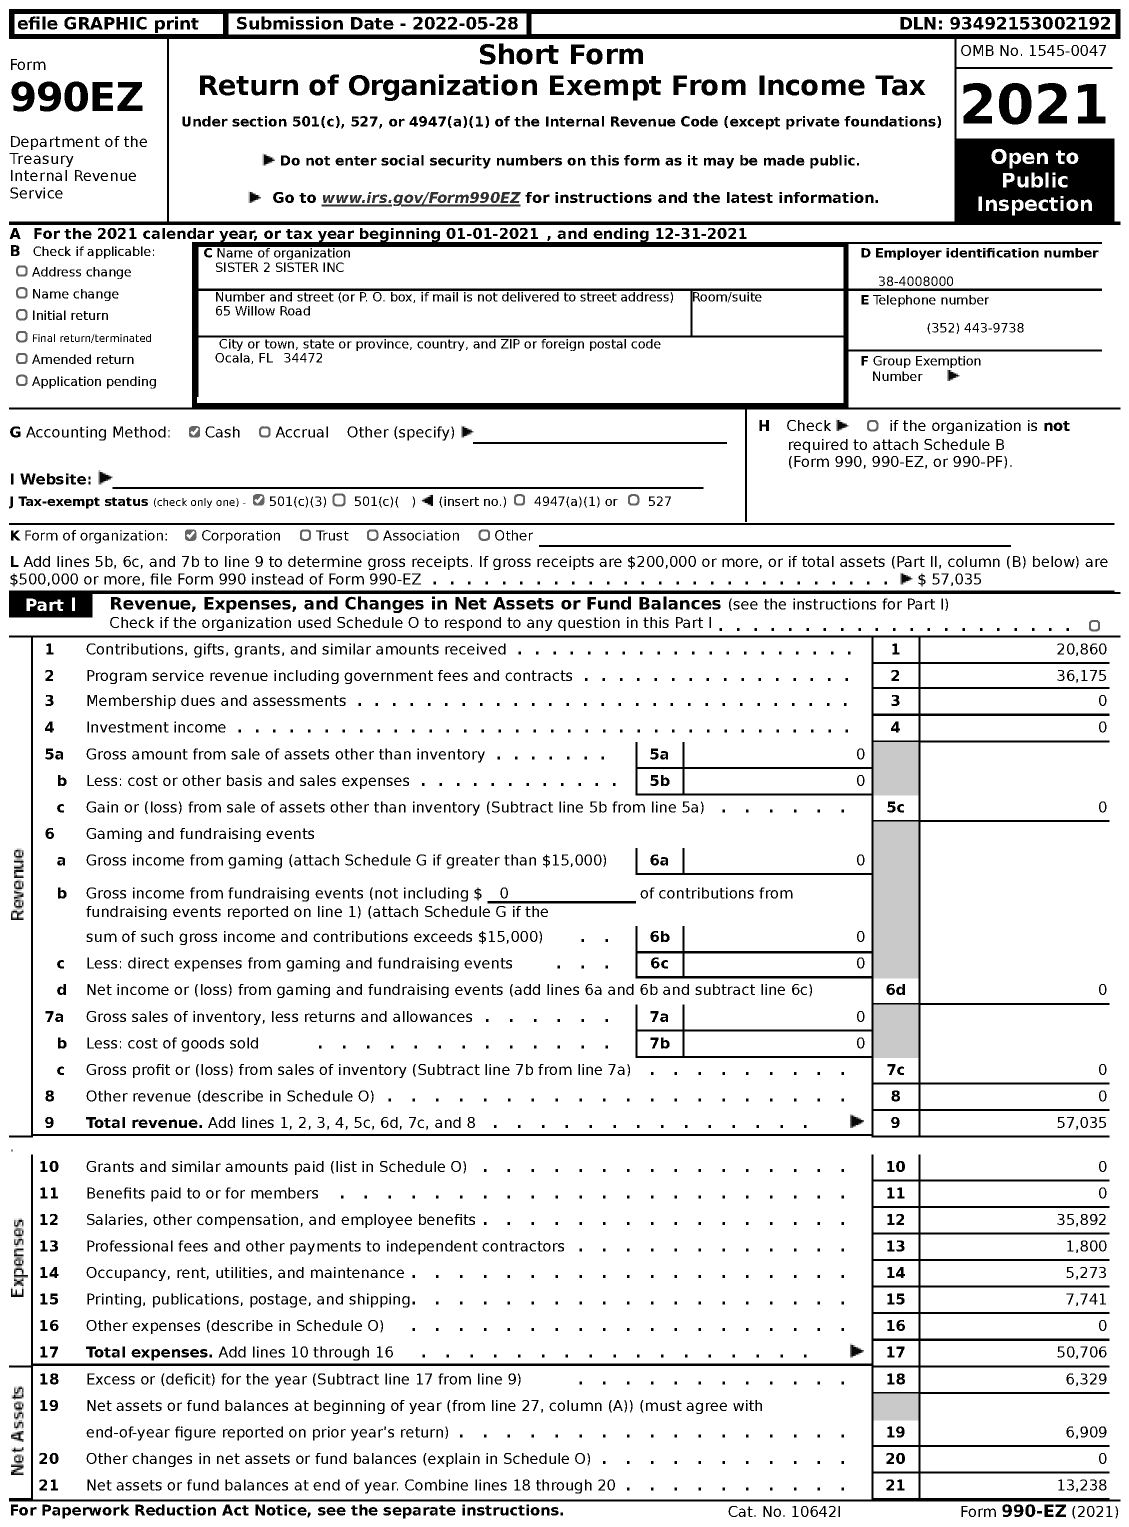 Image of first page of 2021 Form 990EZ for Sister 2 Sister